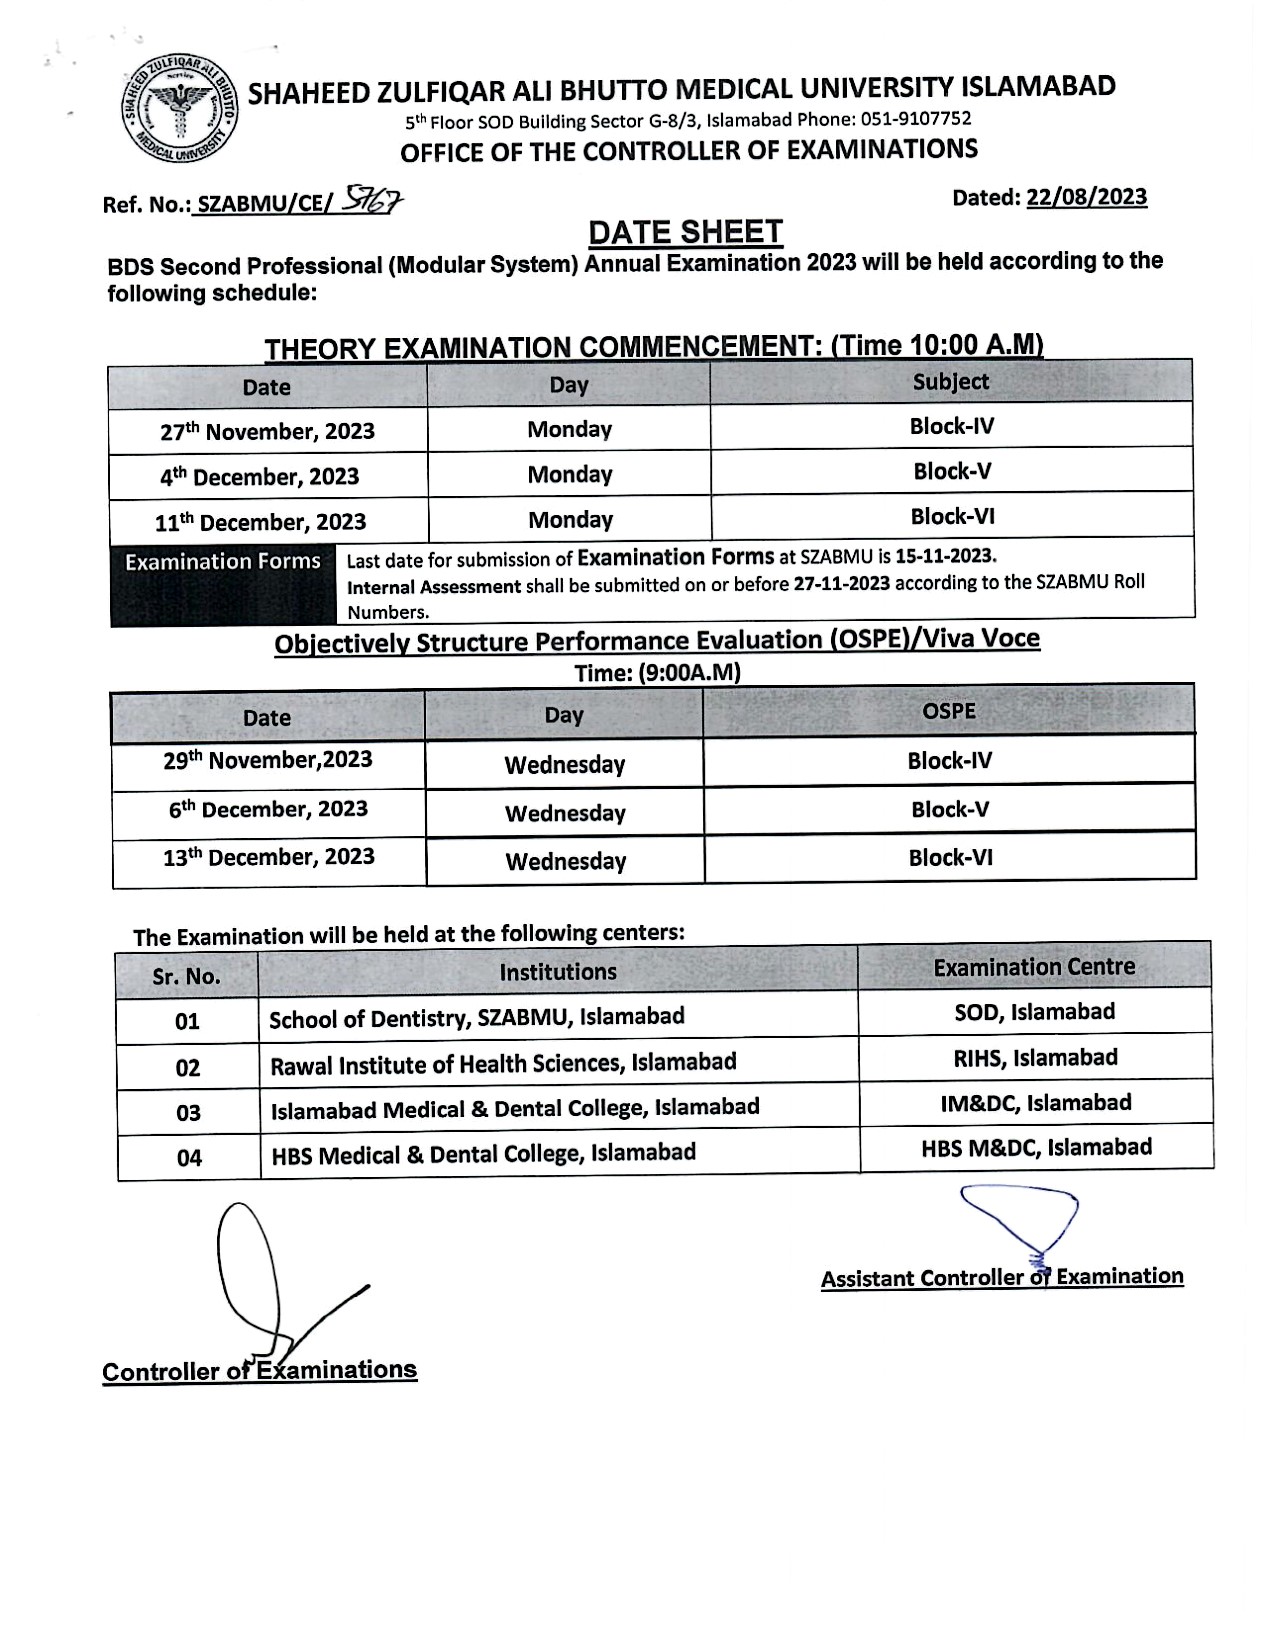 Date Sheet - BDS All Professionals Annual Examinations 2023